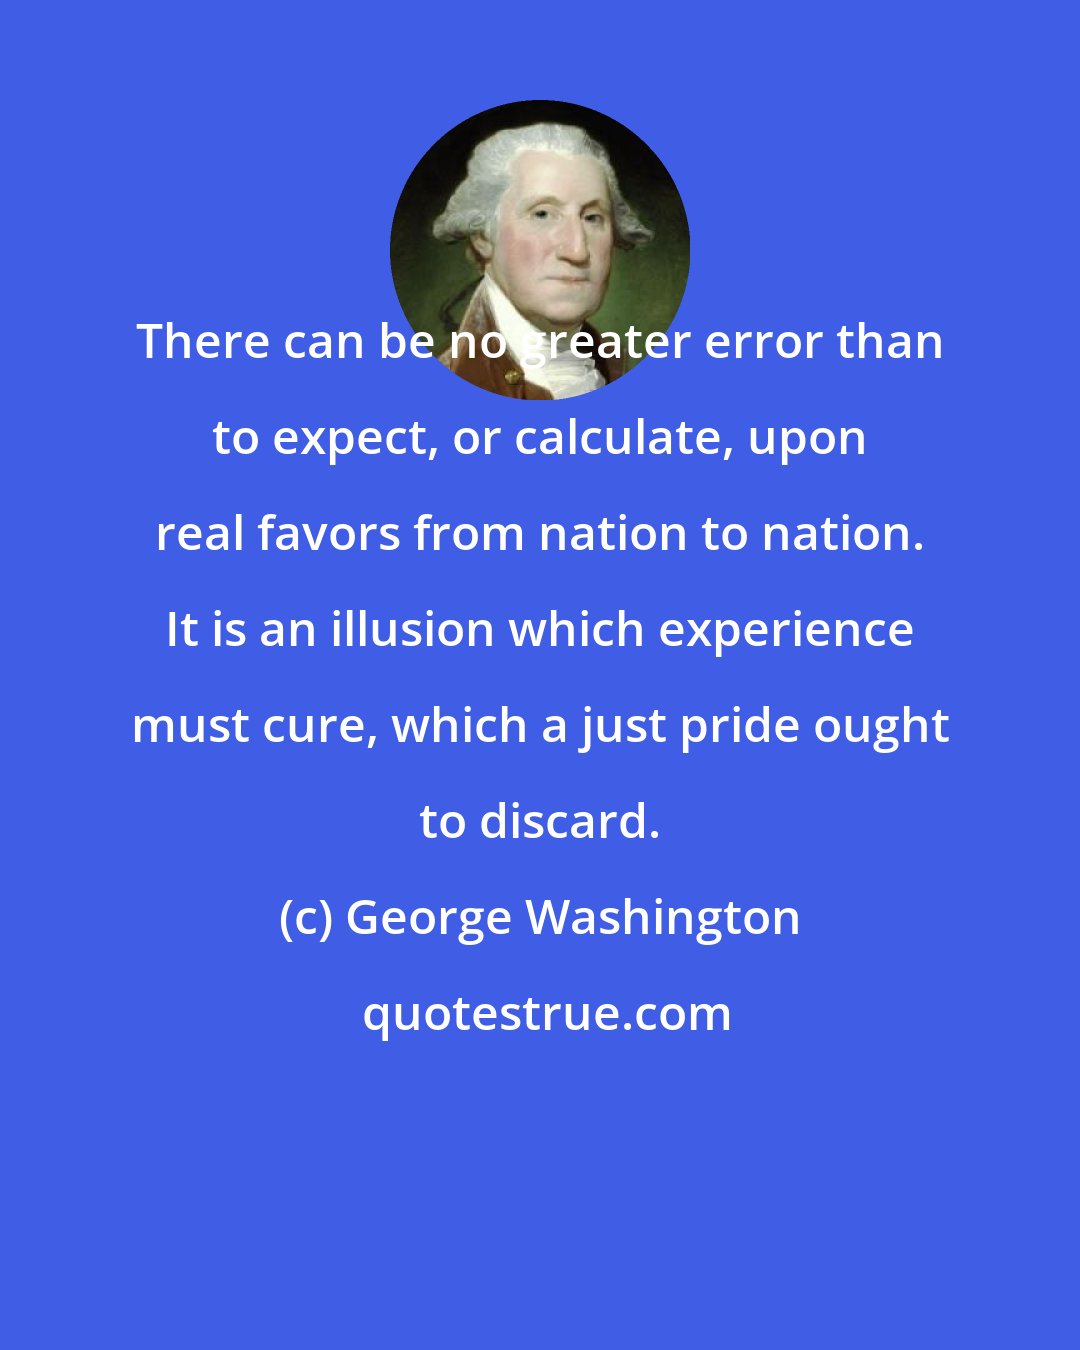 George Washington: There can be no greater error than to expect, or calculate, upon real favors from nation to nation. It is an illusion which experience must cure, which a just pride ought to discard.